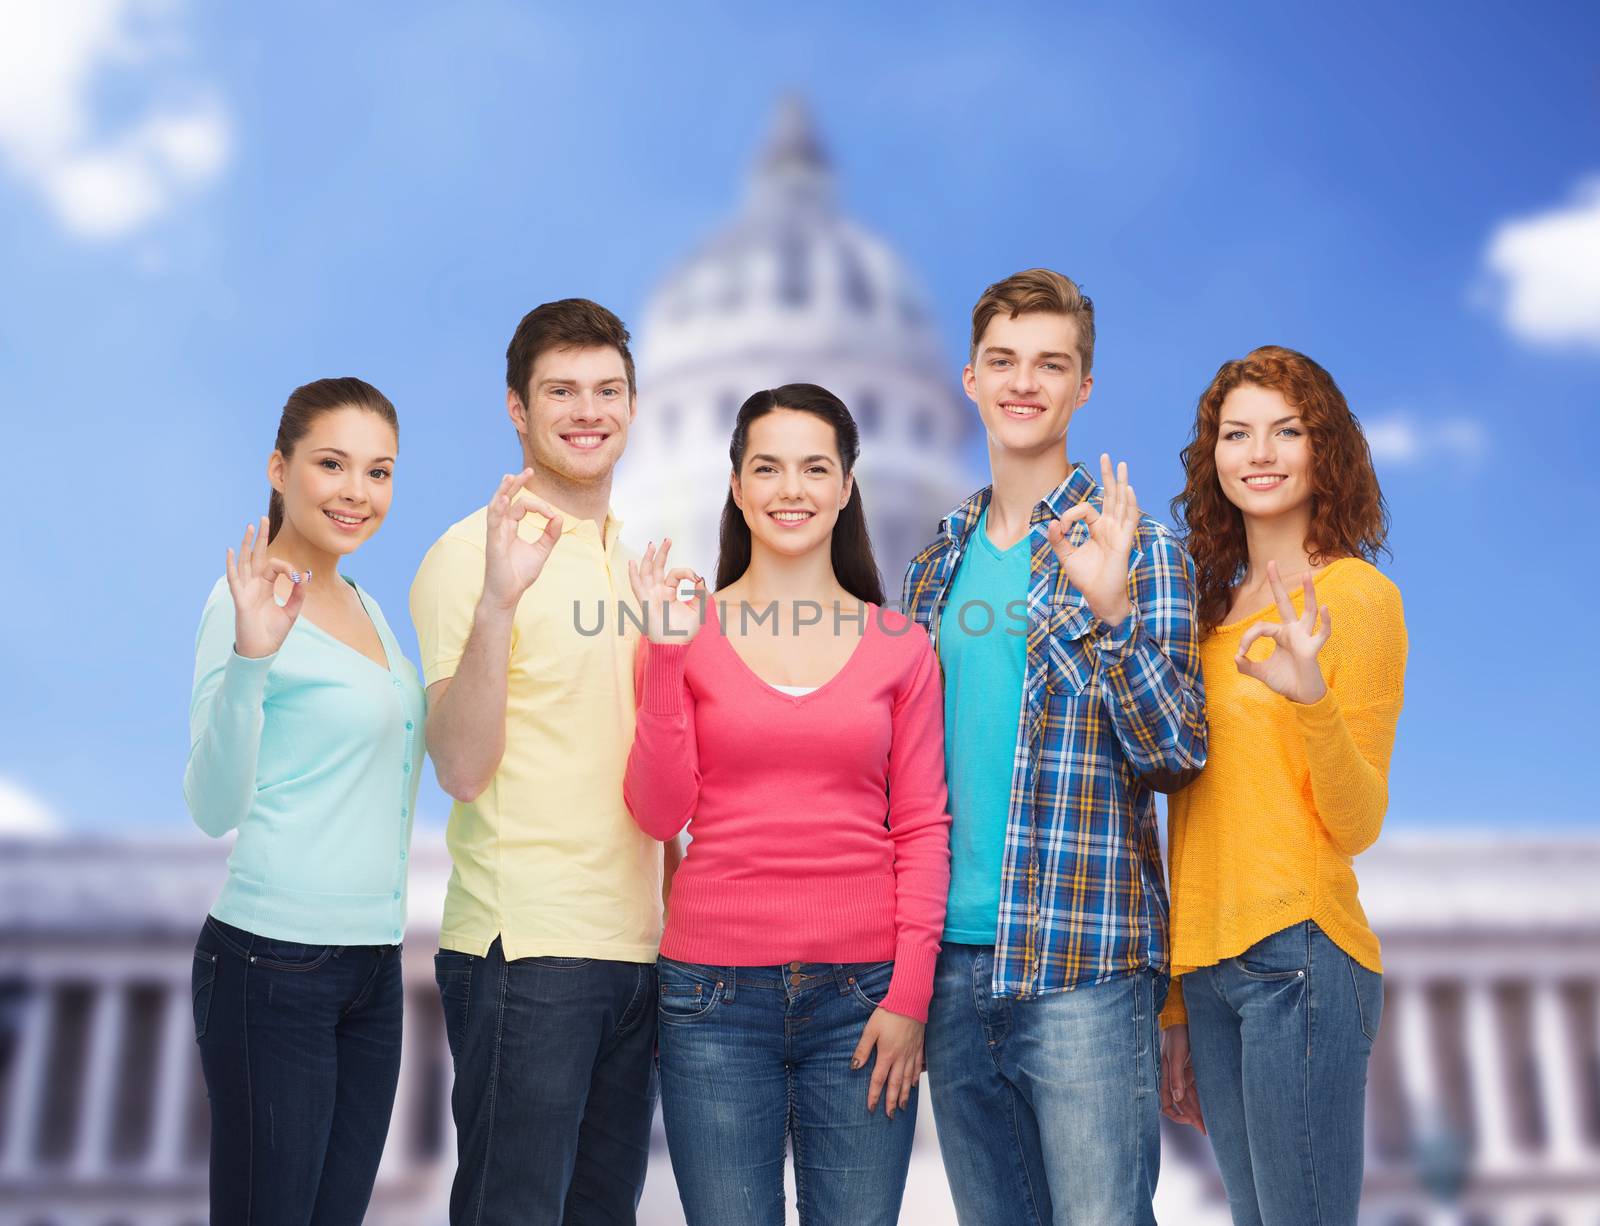 friendship, tourism, travel and people concept - group of smiling teenagers showing ok sign over white house background